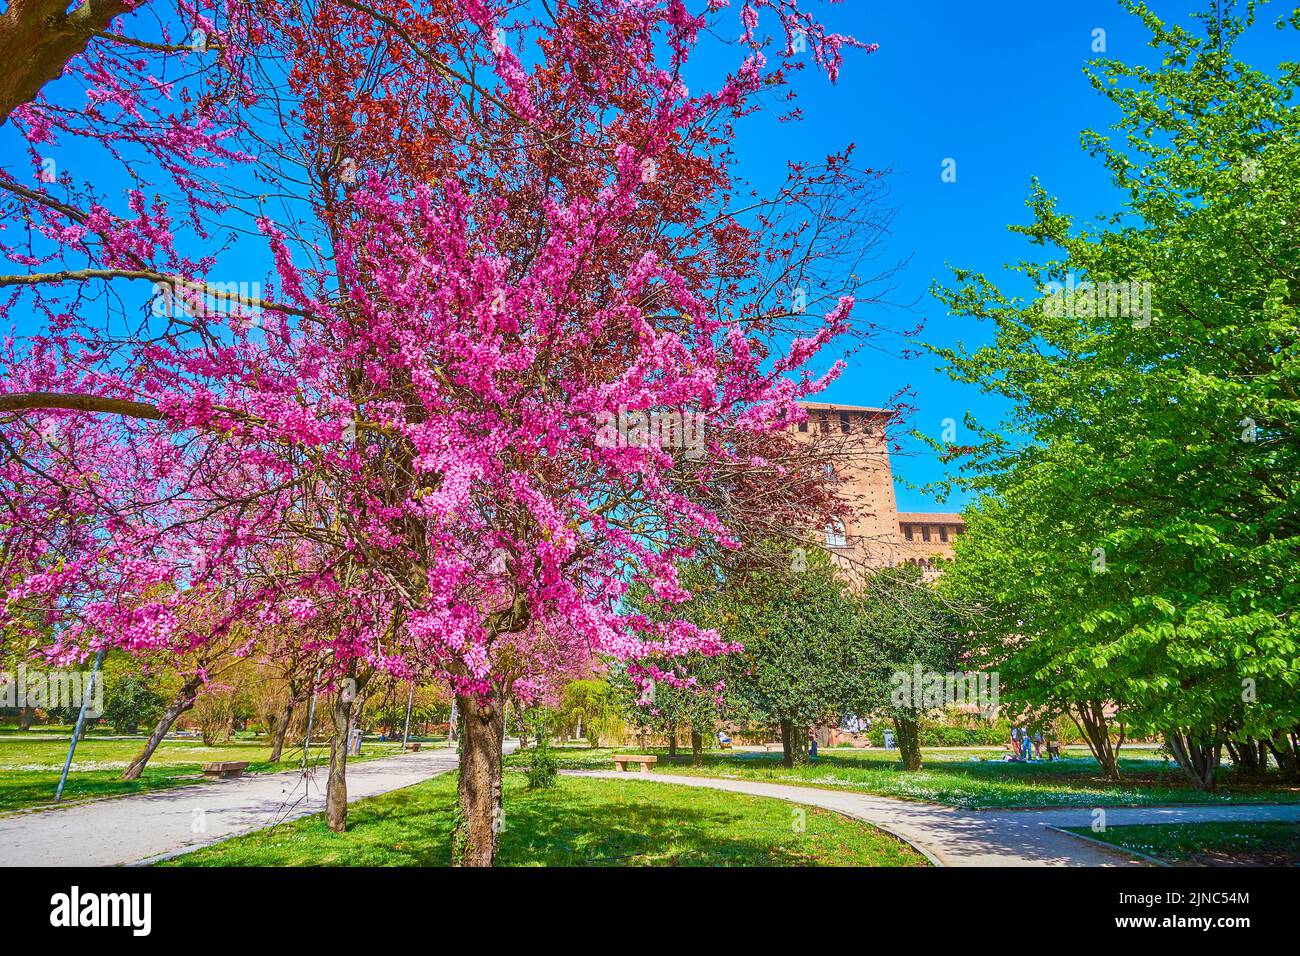 The alley with blooming pink and purple Eastern Redbud trees in Visconti Castle park, Pavia, Italy Stock Photo